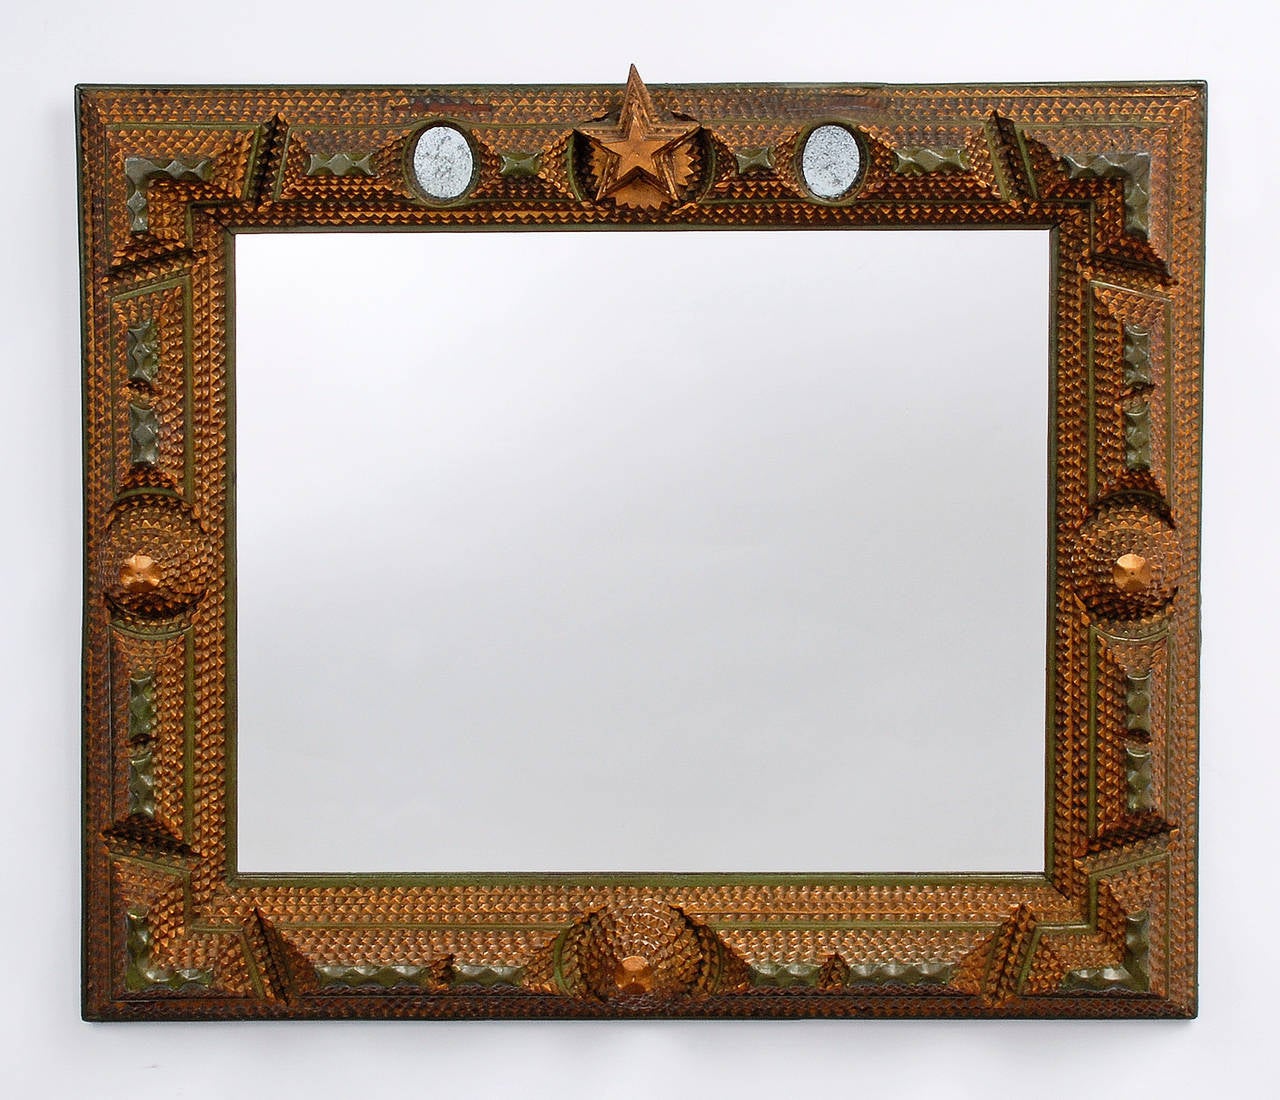 Fine tramp art mirror frame with painted decoration, a large central star and inset mirrors. The frame exhibits a wonderful original painted surface and is deeply layered.